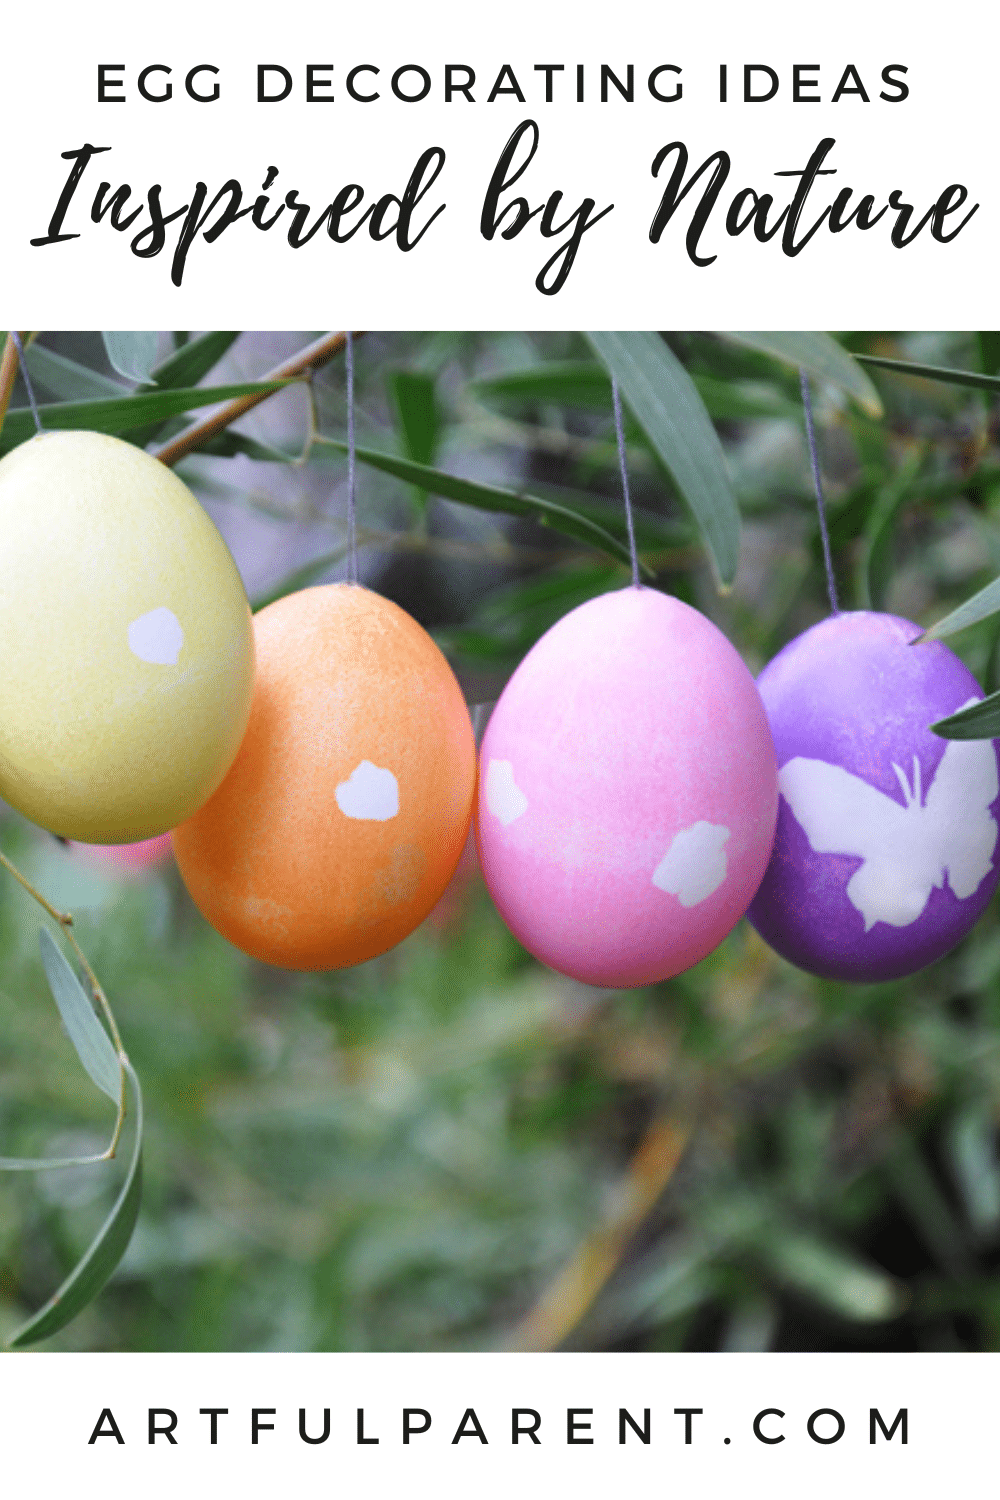 5 Easter Egg Decorating Ideas Inspired by Nature